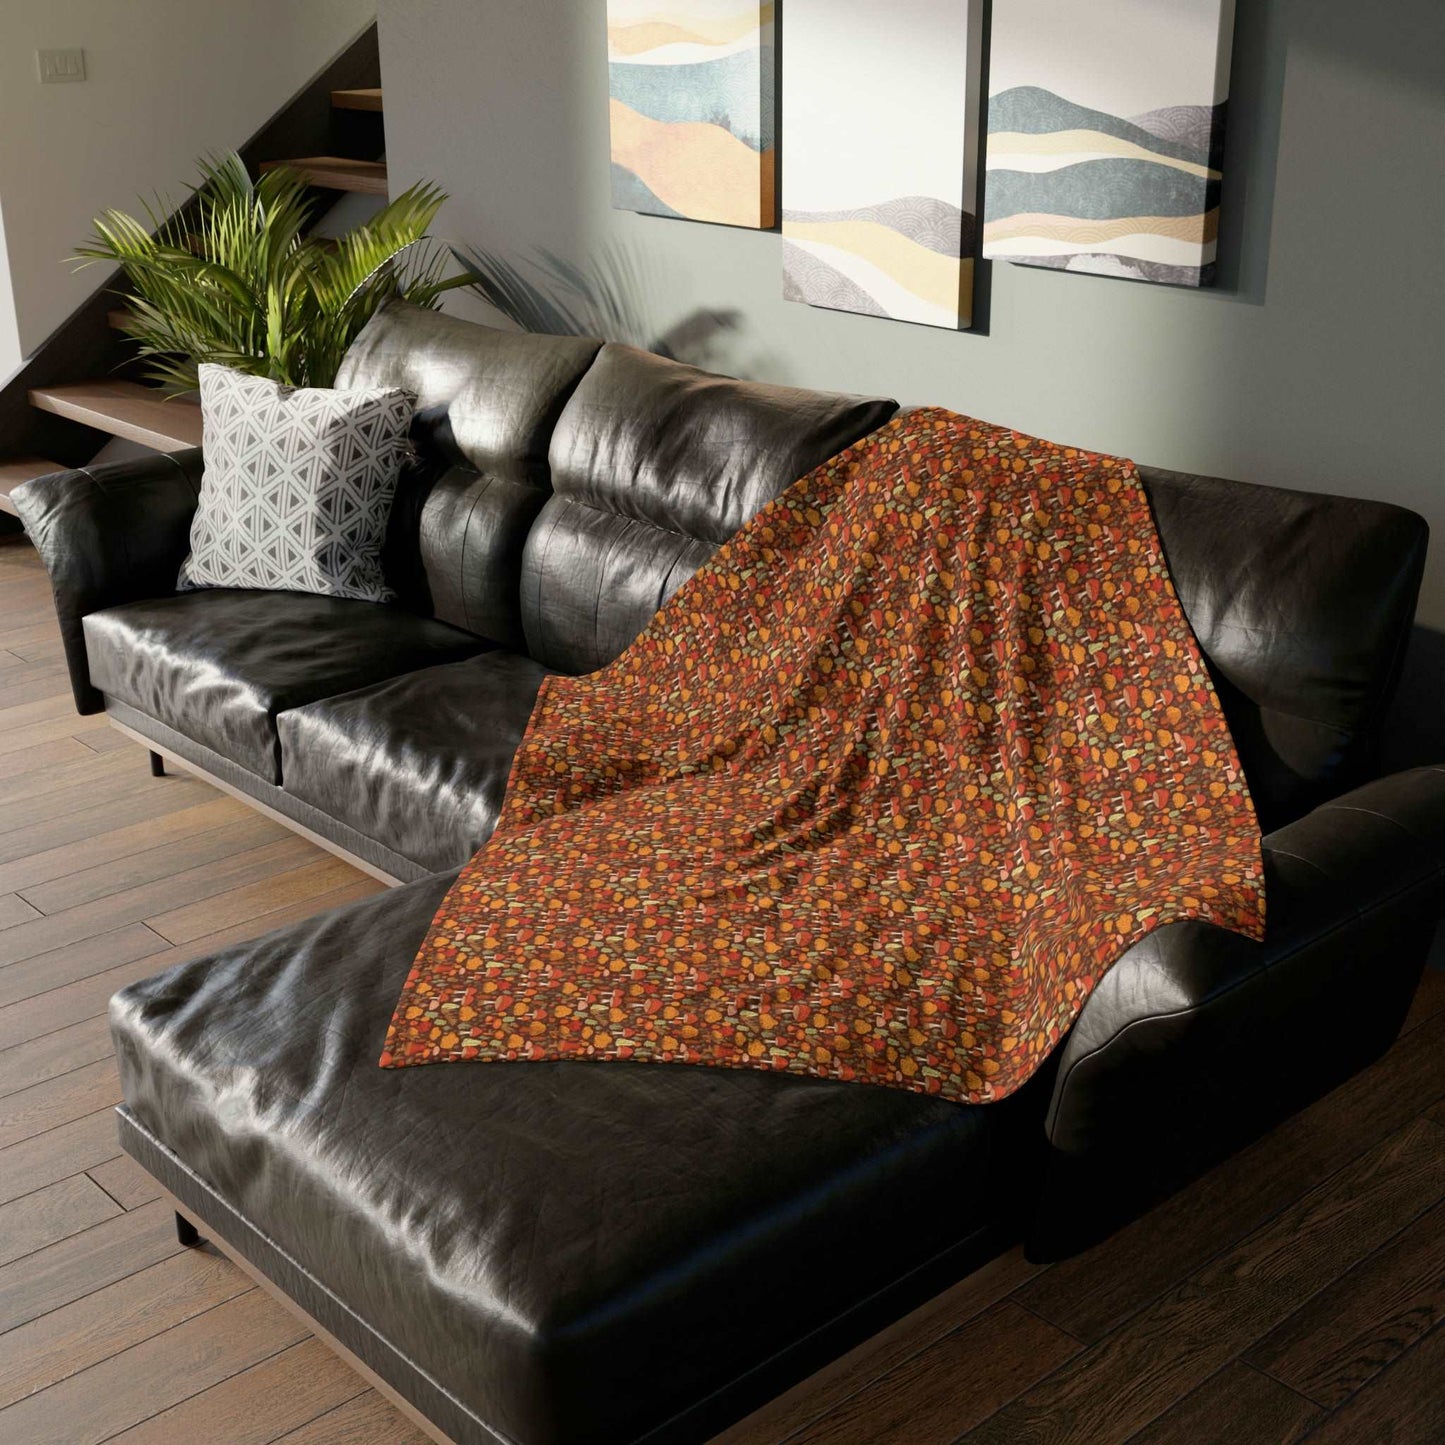 Autumn Spore Wonderland: Enchanting Mushroom and Leaf Designs - The Ideal Throw for Sofas - Pattern Symphony